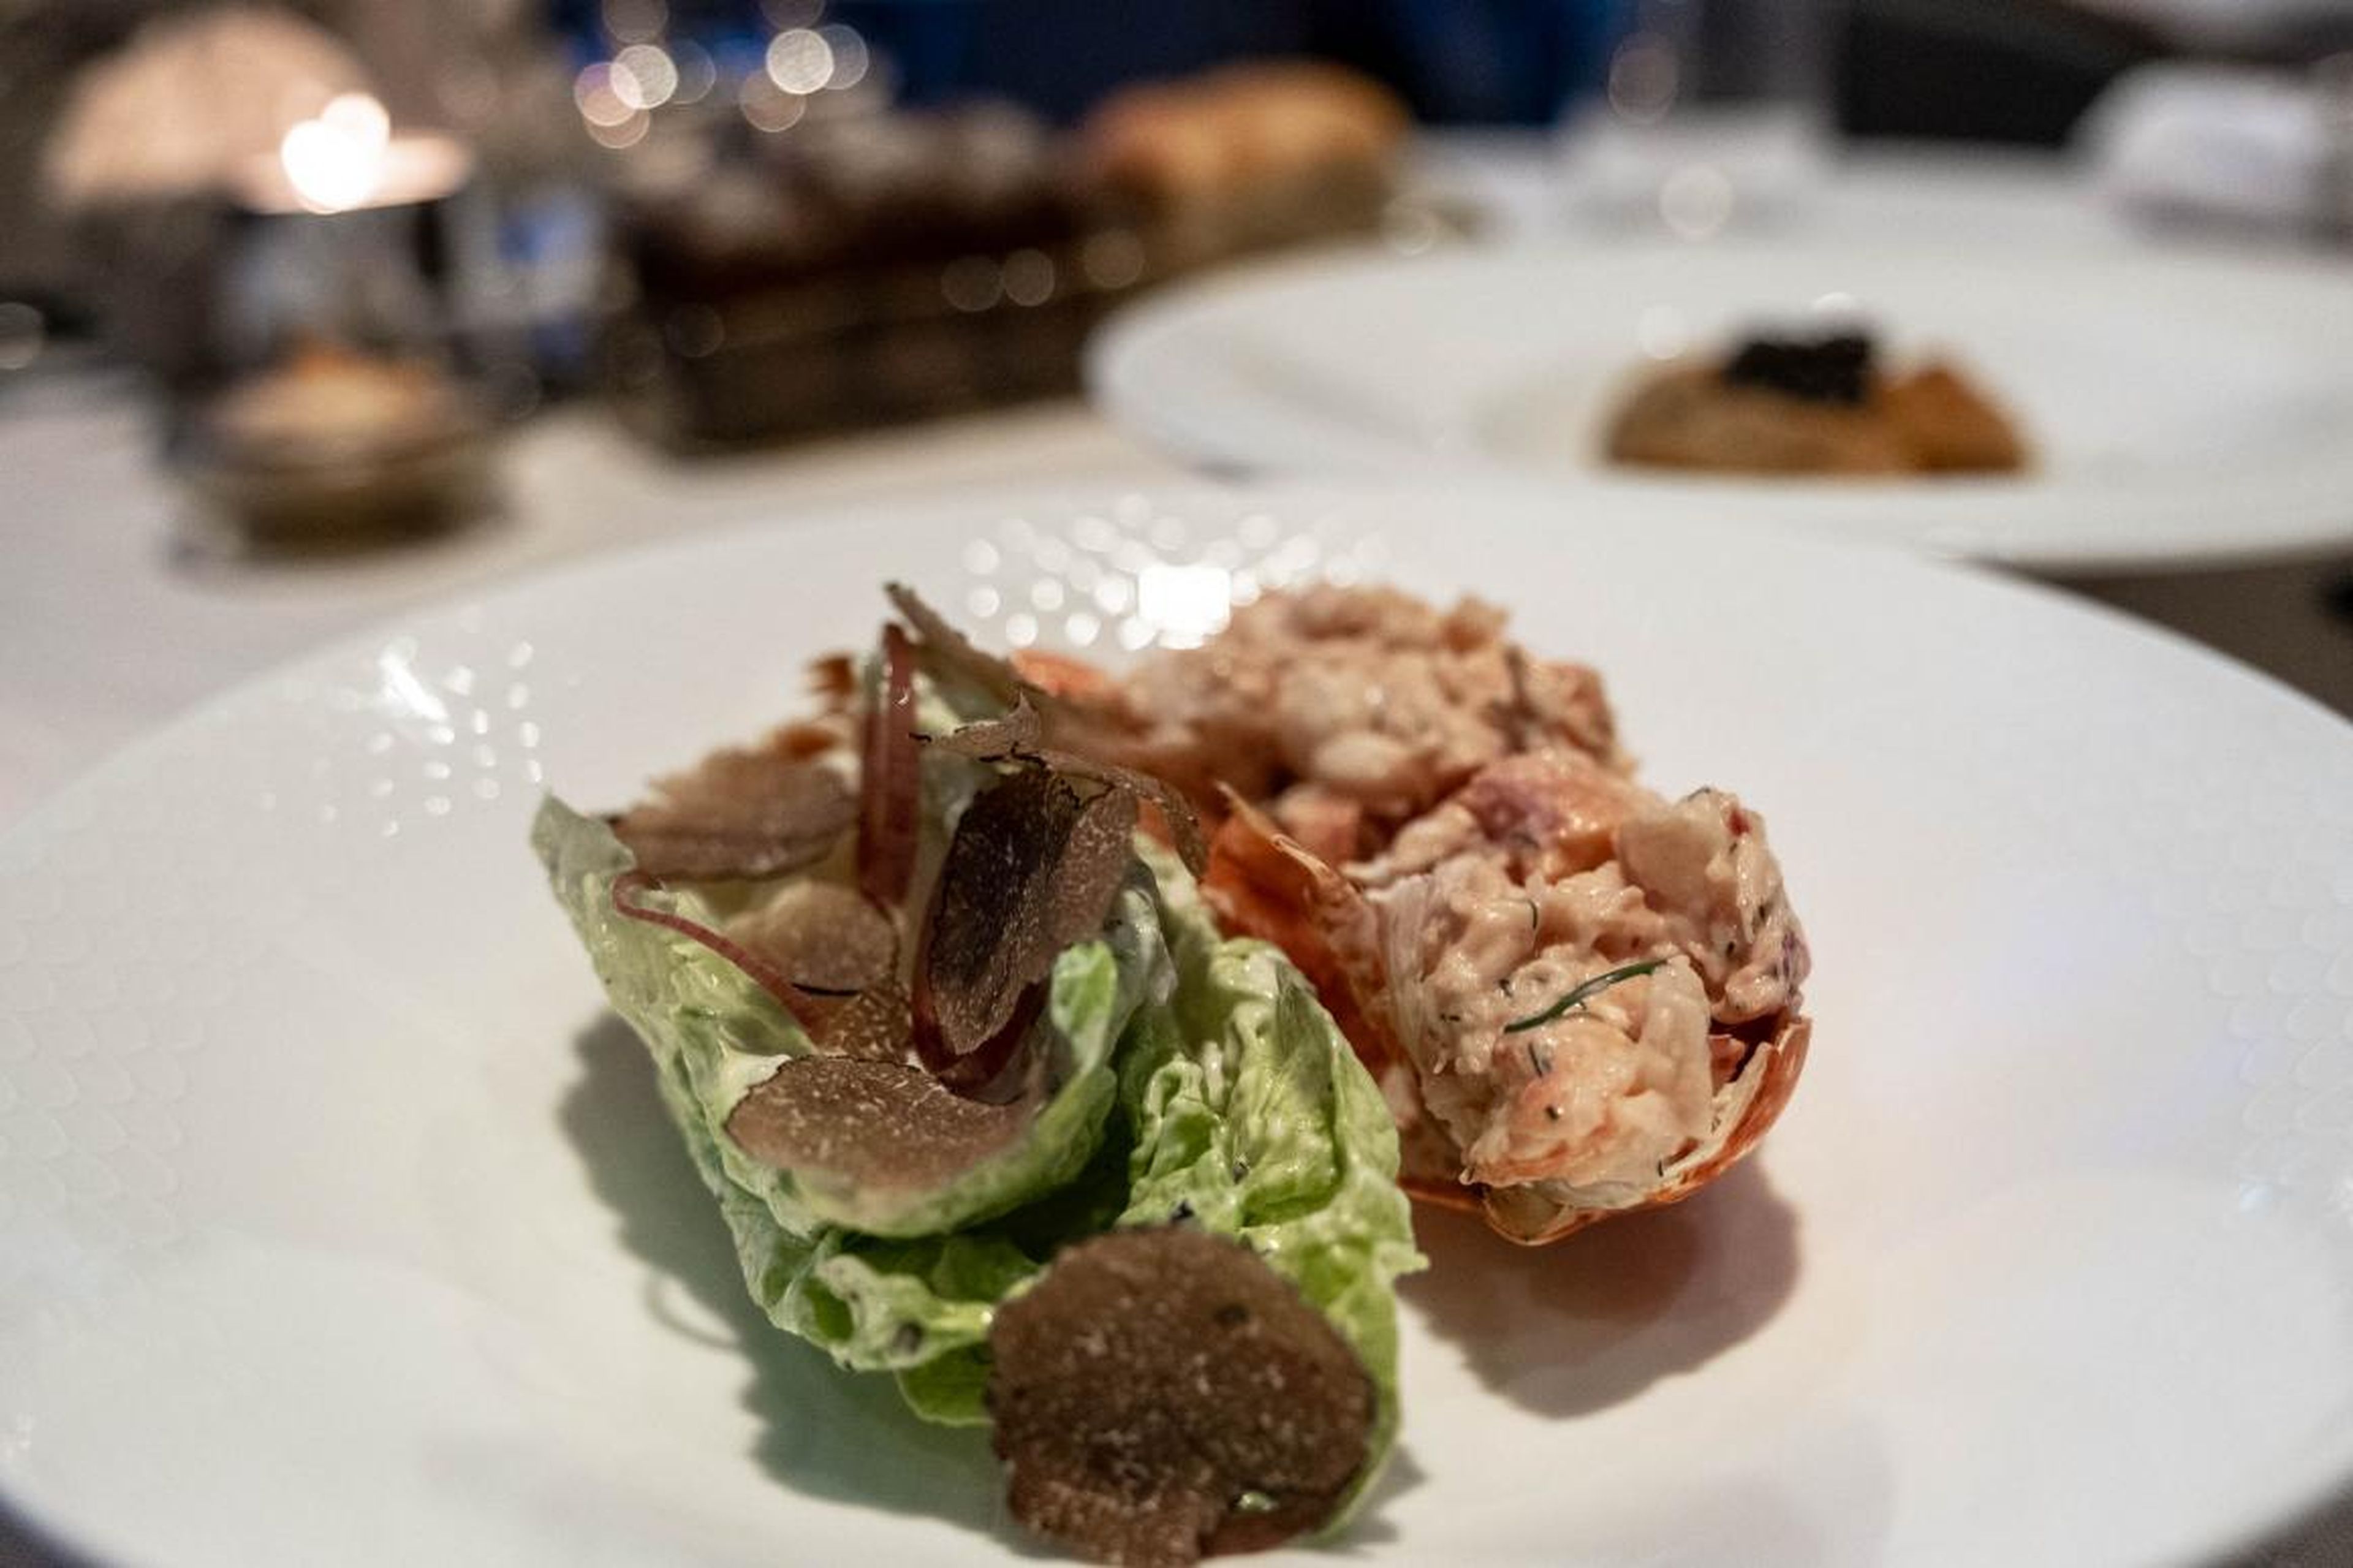 The lobster cocktail (295 AED or $80) was packed with fresh, tender lobster meat brushed with an herby crème fraîche sauce and accompanied by a few leaves of Baby Gem lettuce that were topped with ... black truffle. Dishes like